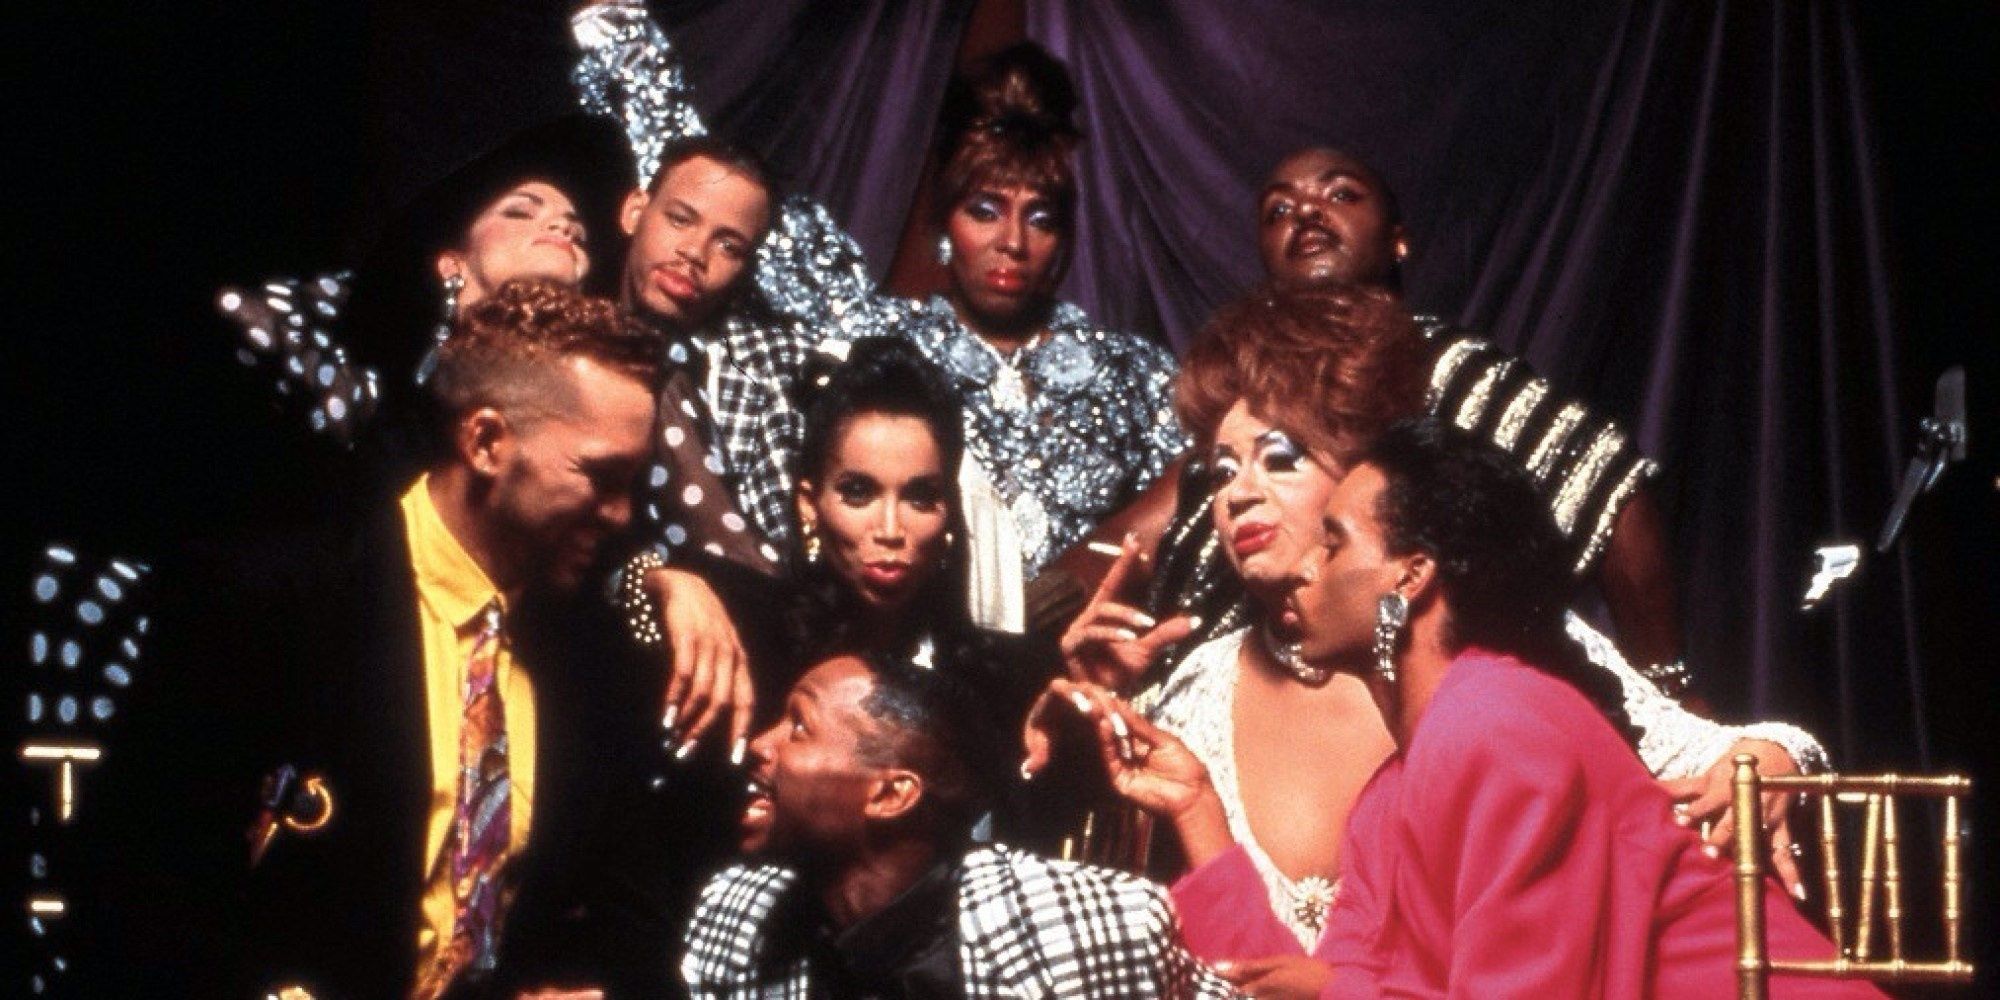 The cast of Paris Is Burning 1990 sitting together